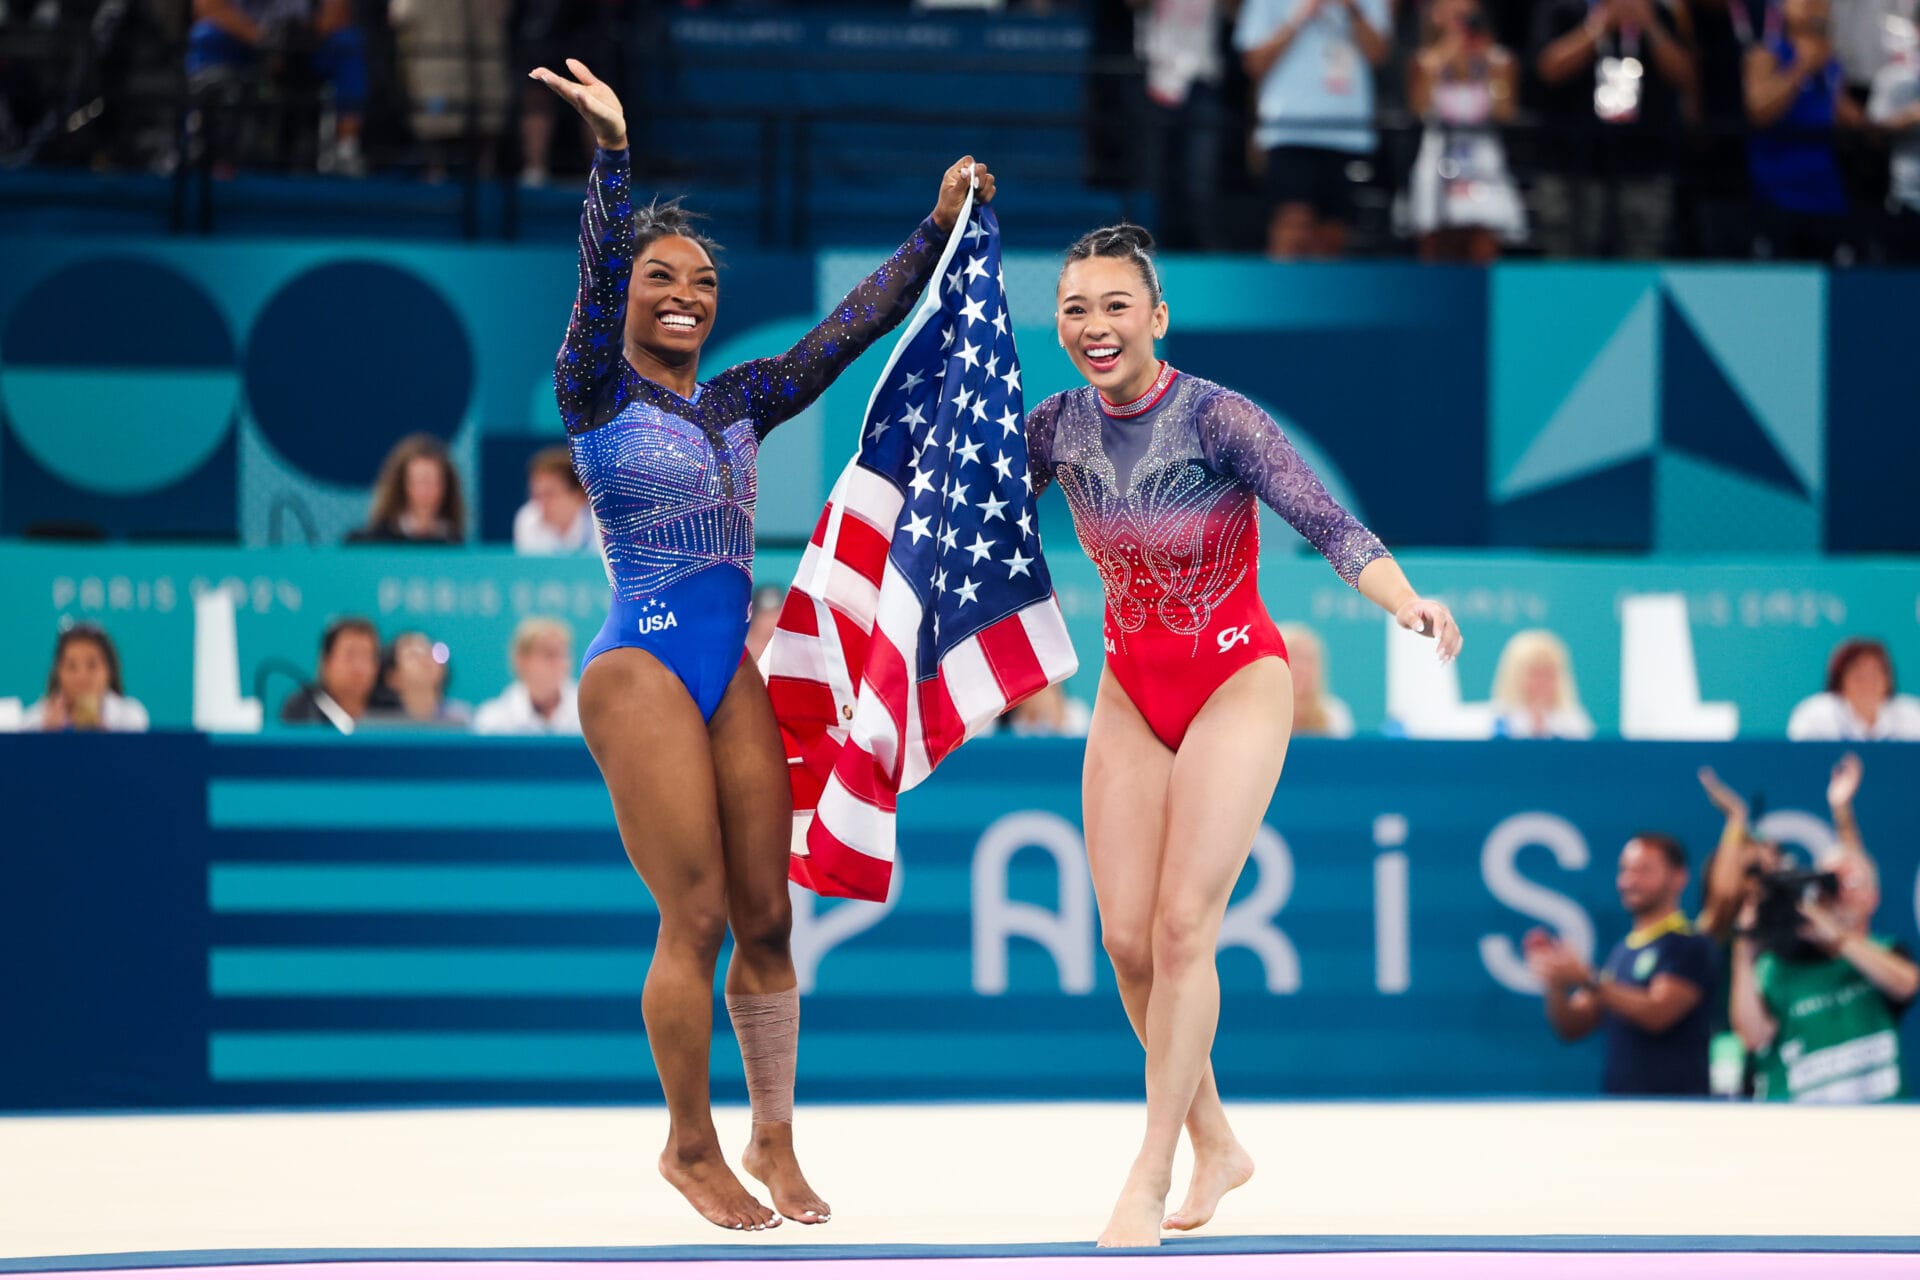 Simone Biles (L) and Sunisa Lee of Team United States celebrate after winning respectively the gold and bronze medal at the end of the Artistic Gymnastics - Women's All-Around Final on day 6 of the Paris 2024 Olympic Games at Bercy Arena on August 1, 2024 in Paris, France. (Photo by Andrzej Iwanczuk/NurPhoto via Getty Images)